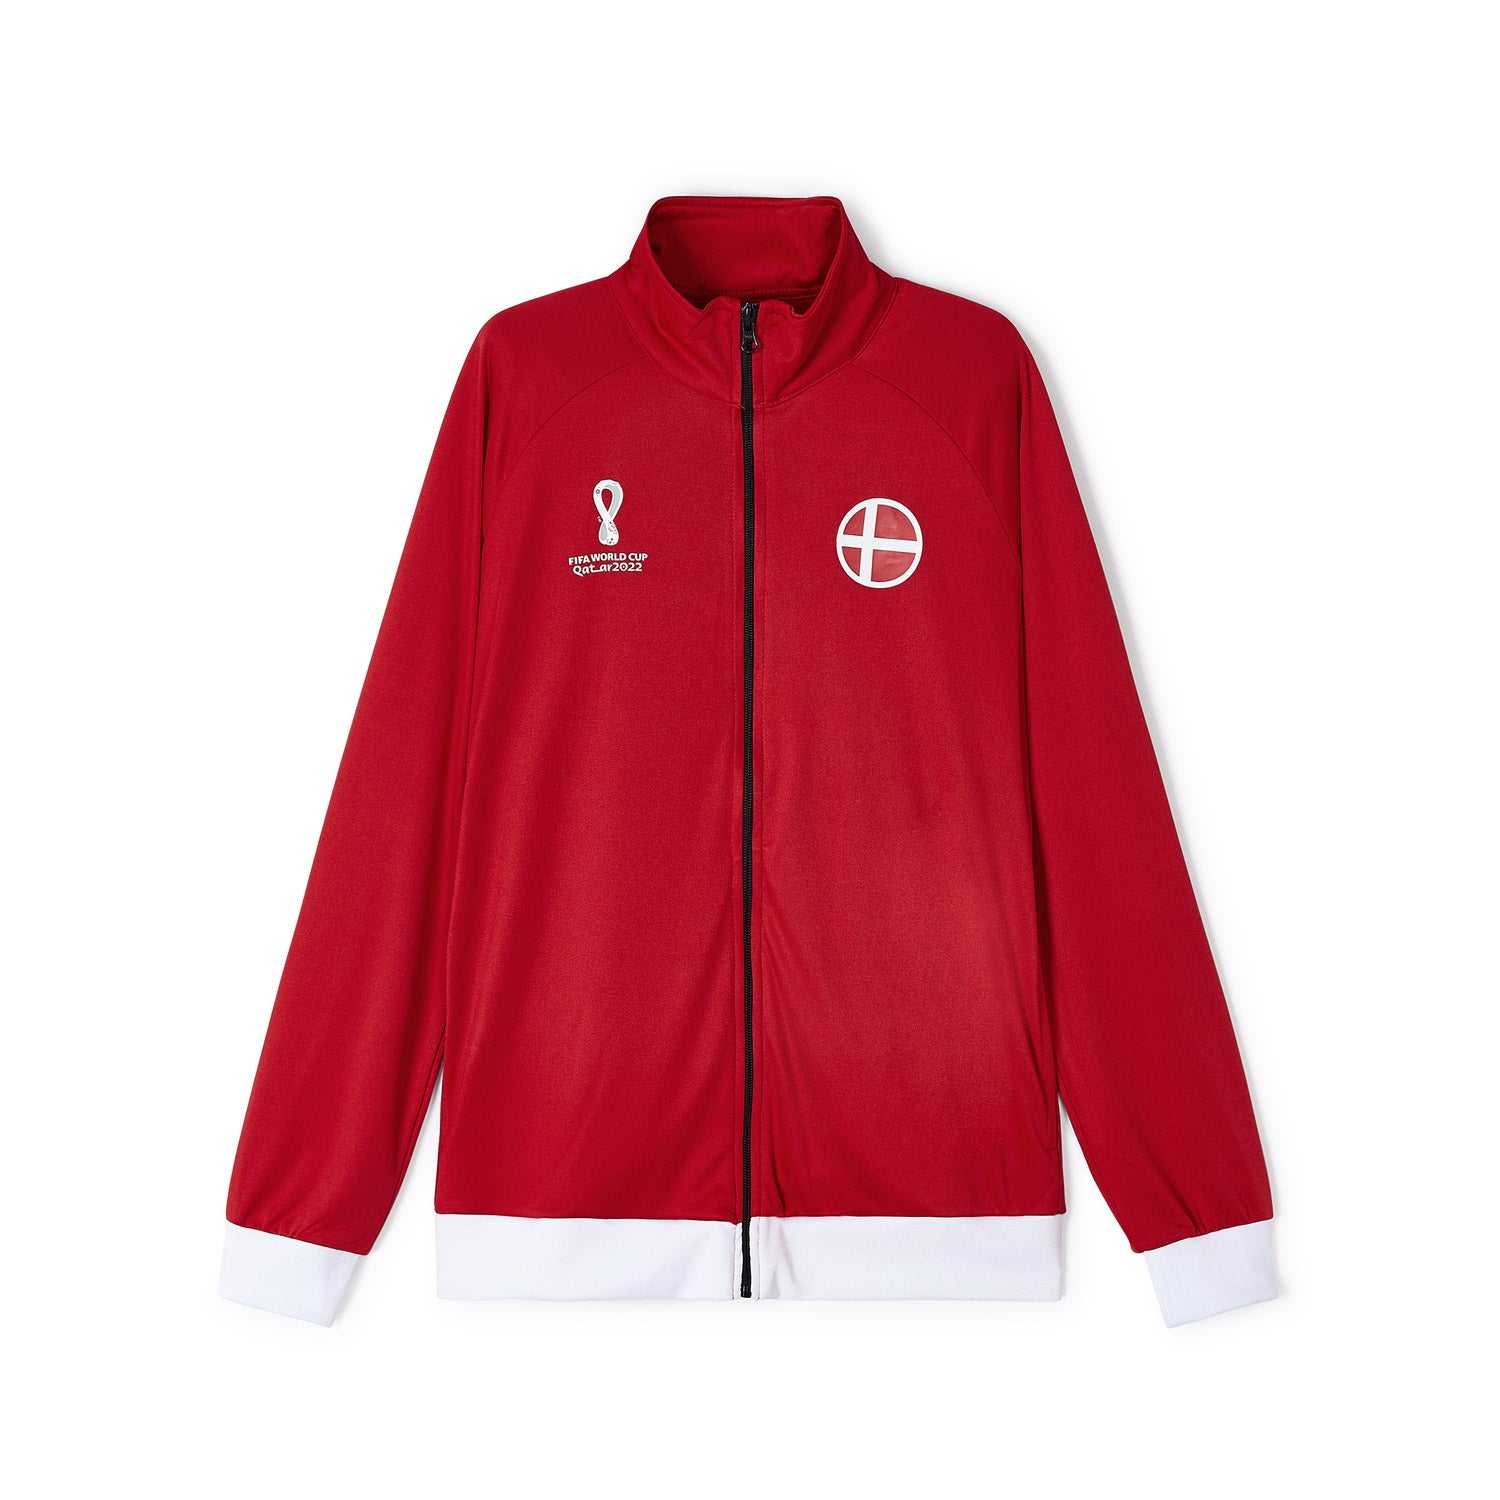 2022 World Cup Denmark Red Jacket - Mens